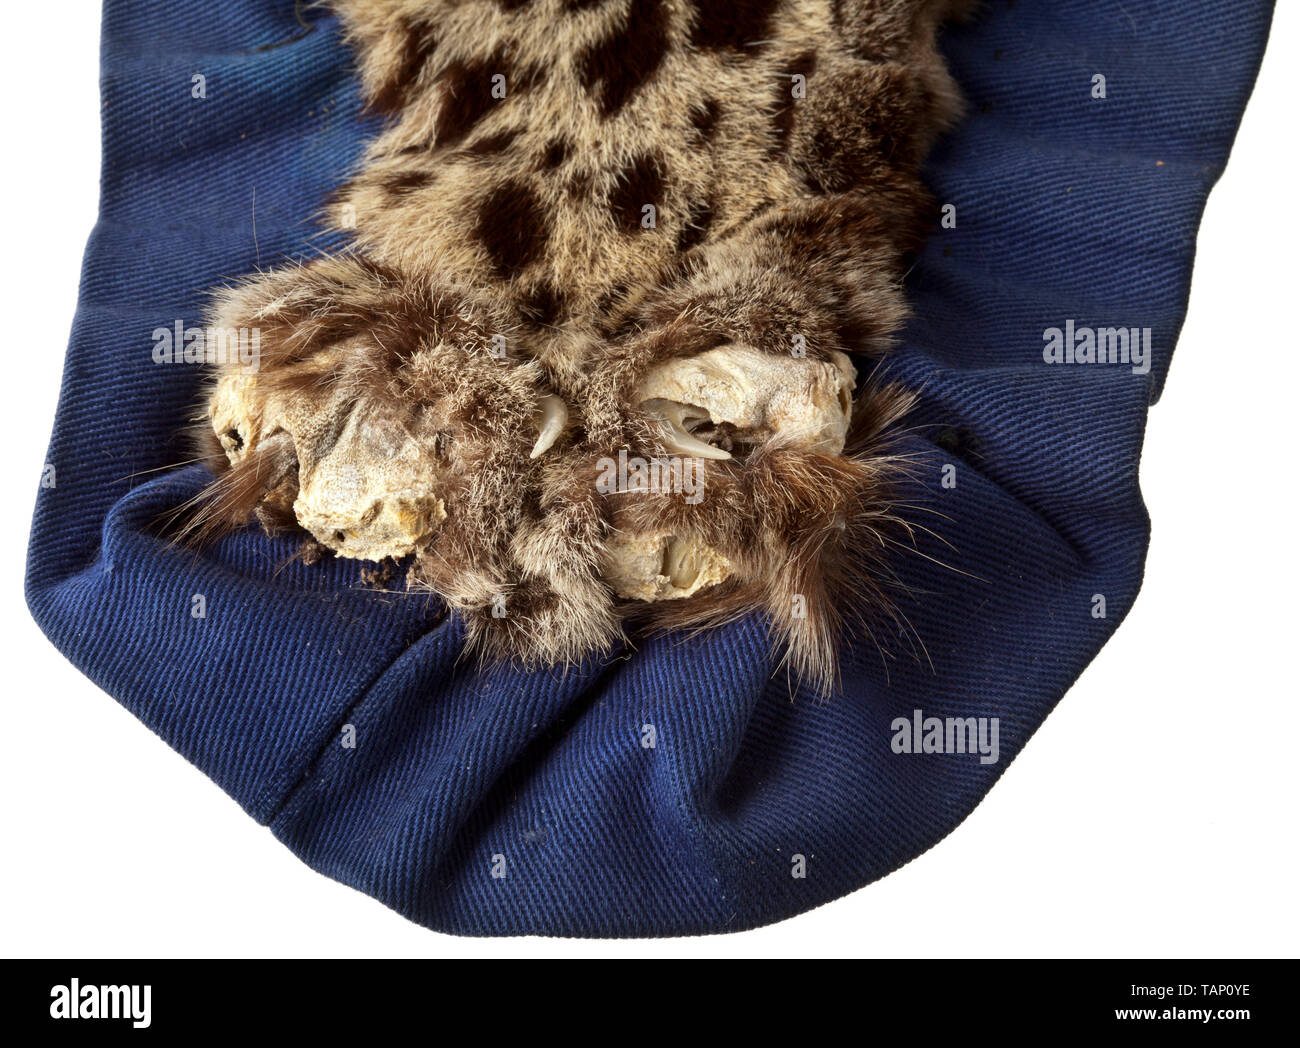 A skin of a snow leopard (Uncia uncia or Panthera uncia), Central Asia, 20th century Beautifully prepared skin of a snow leopard on a blue textile underlay. Slight traces of age, some of the claws are missing. Length 185 cm (including tail), width 112 cm. CITES certificates available. The snow leopard or ounce used to be found in all high mountain regions of Asia, from the Hindu Kush to the Himalaya, at altitudes of up to 6,000 m. Today, the population is endangered everywhere, and the snow leopard is one of the world's scarcest big cats. Thus tr, Additional-Rights-Clearance-Info-Not-Available Stock Photo